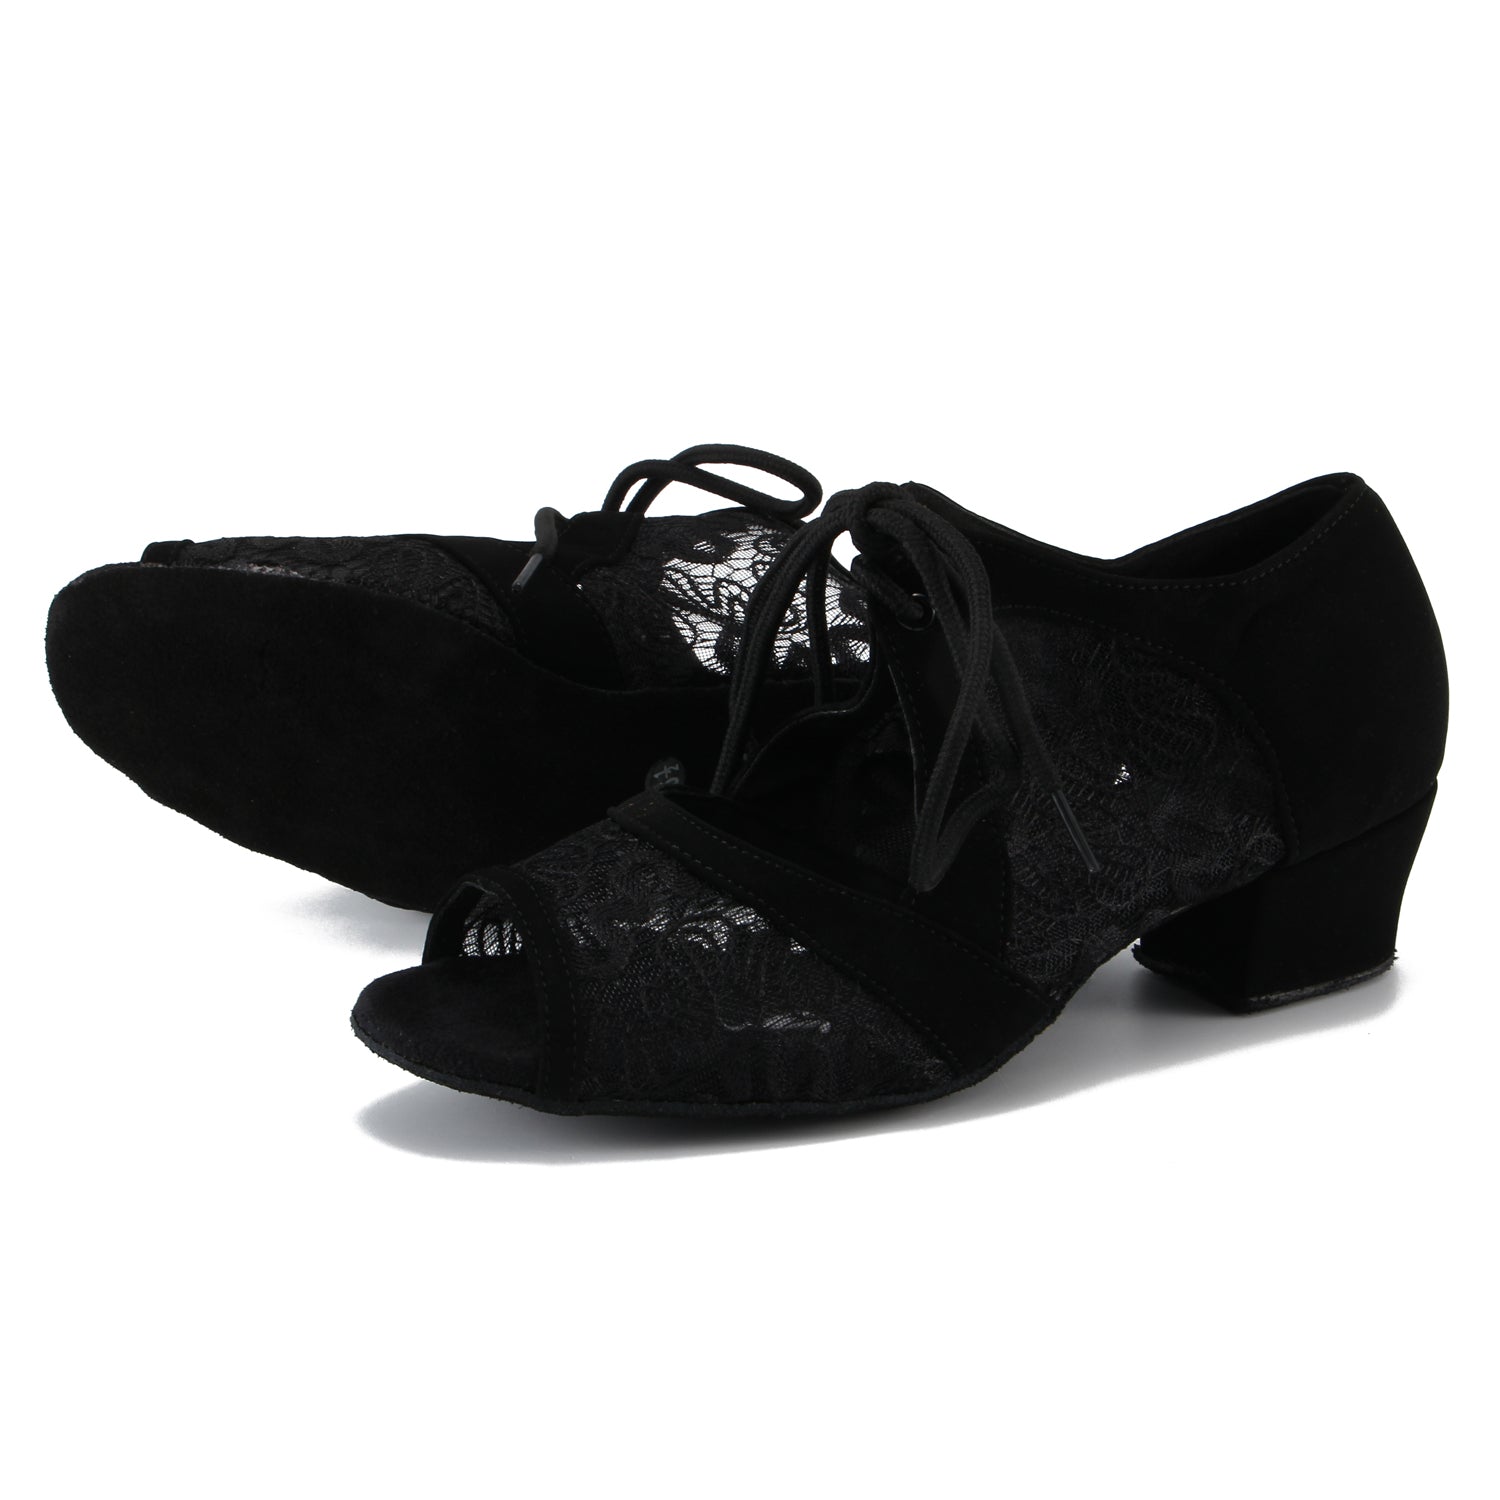 Women Ballroom Dancing Shoes with Suede Sole for Tango Latin Practice, Lace-up Open-toe Design in Black (PD-3001A)2